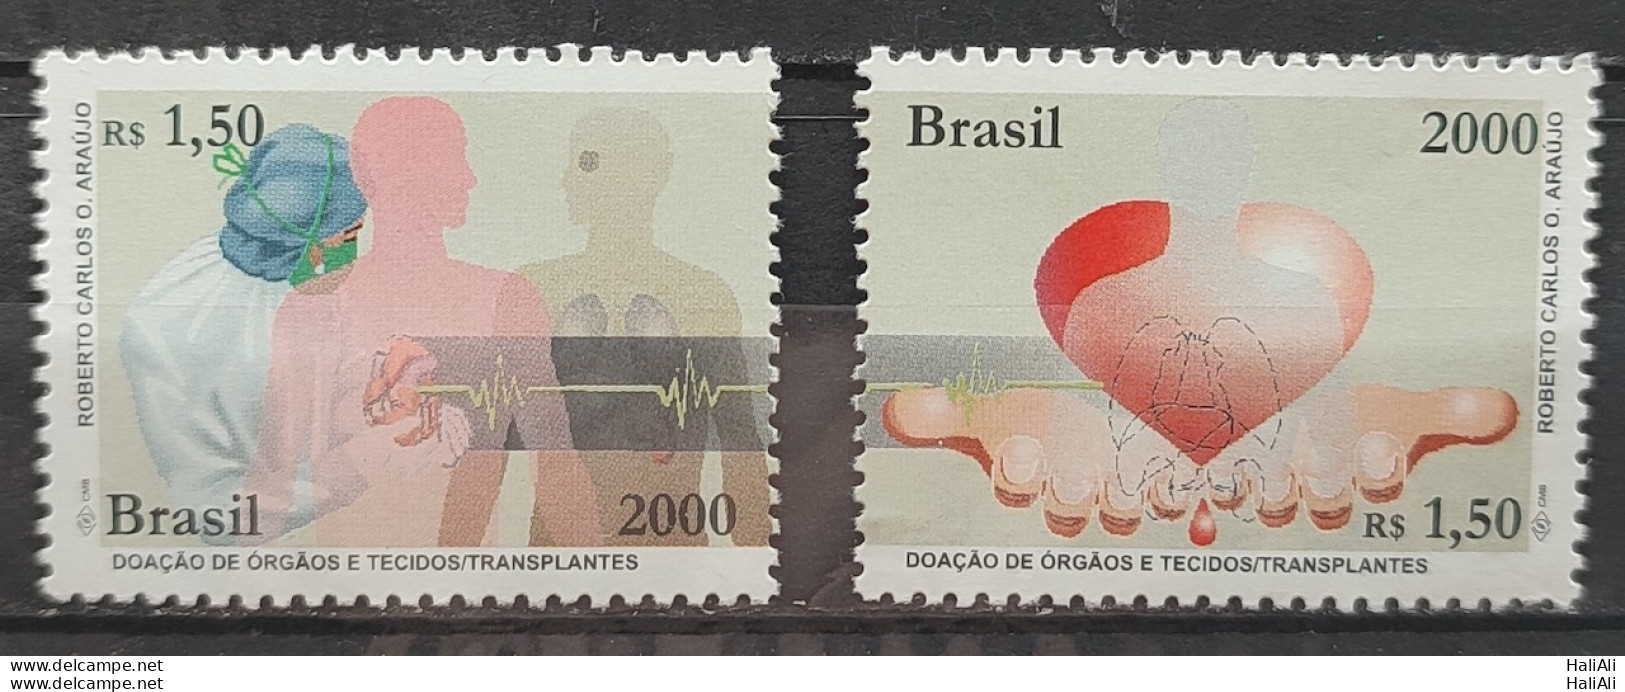 C 2341 Brazil Stamp Donation Of Organ And Tissues Science Health 2000 Complete Series Separate - Neufs